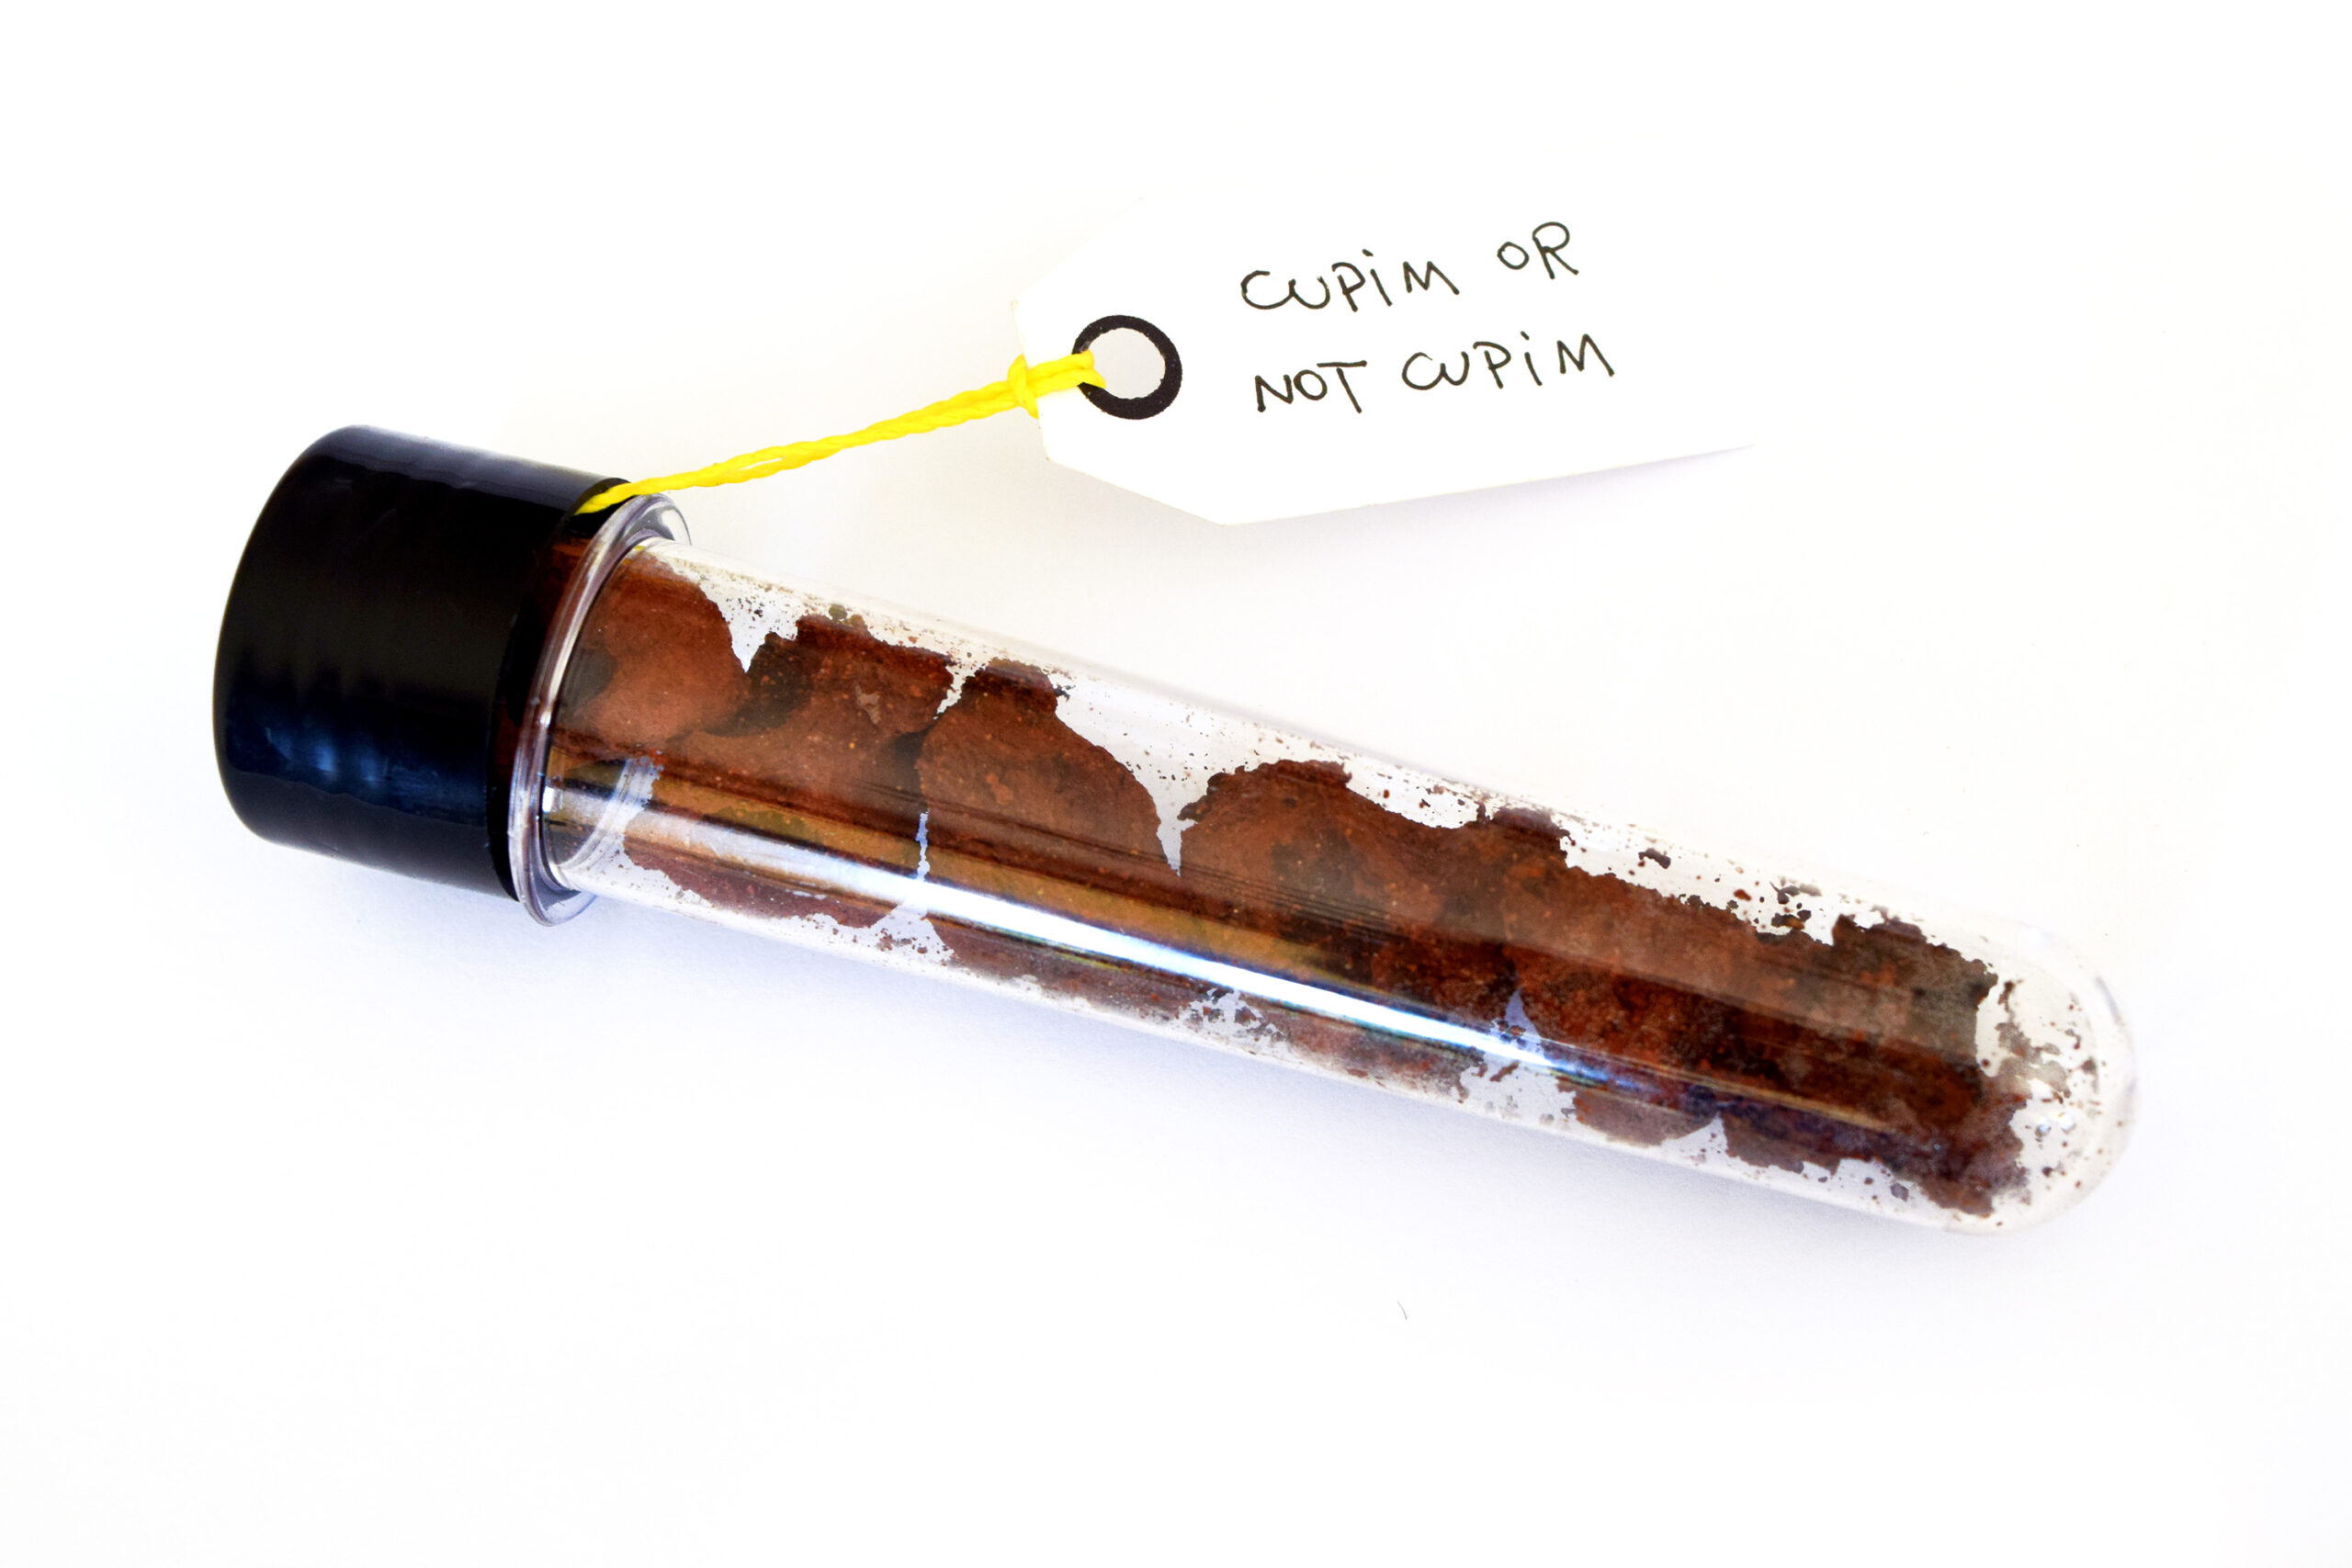 a glass test tube on white background with red-brown chunks of rock/dirt inside, and a white paper label that says "cupim or not cupim"